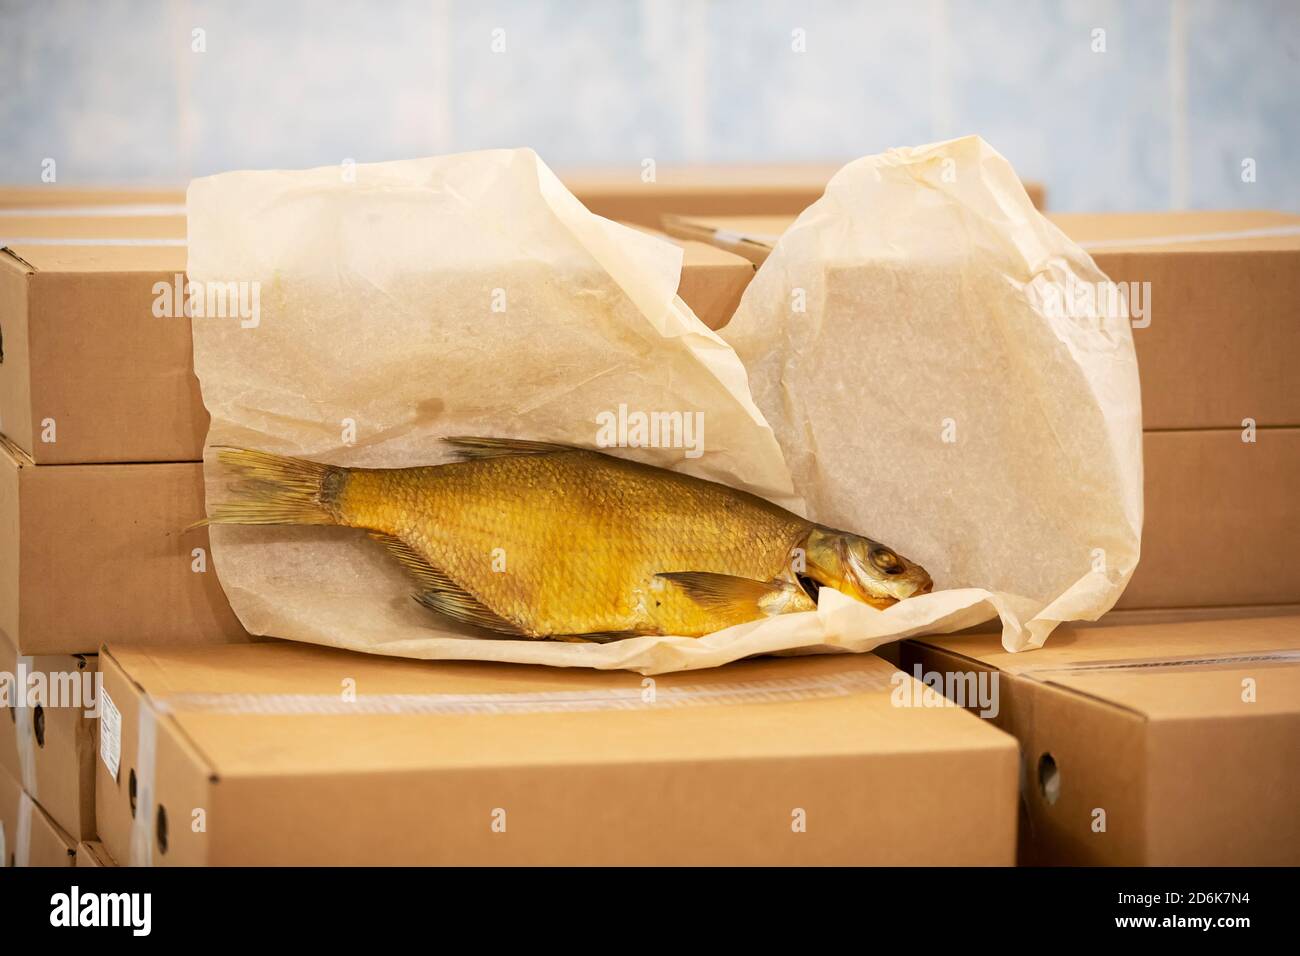 Smoked mackerel lies on cardboard boxes in a warehouse. Stock Photo